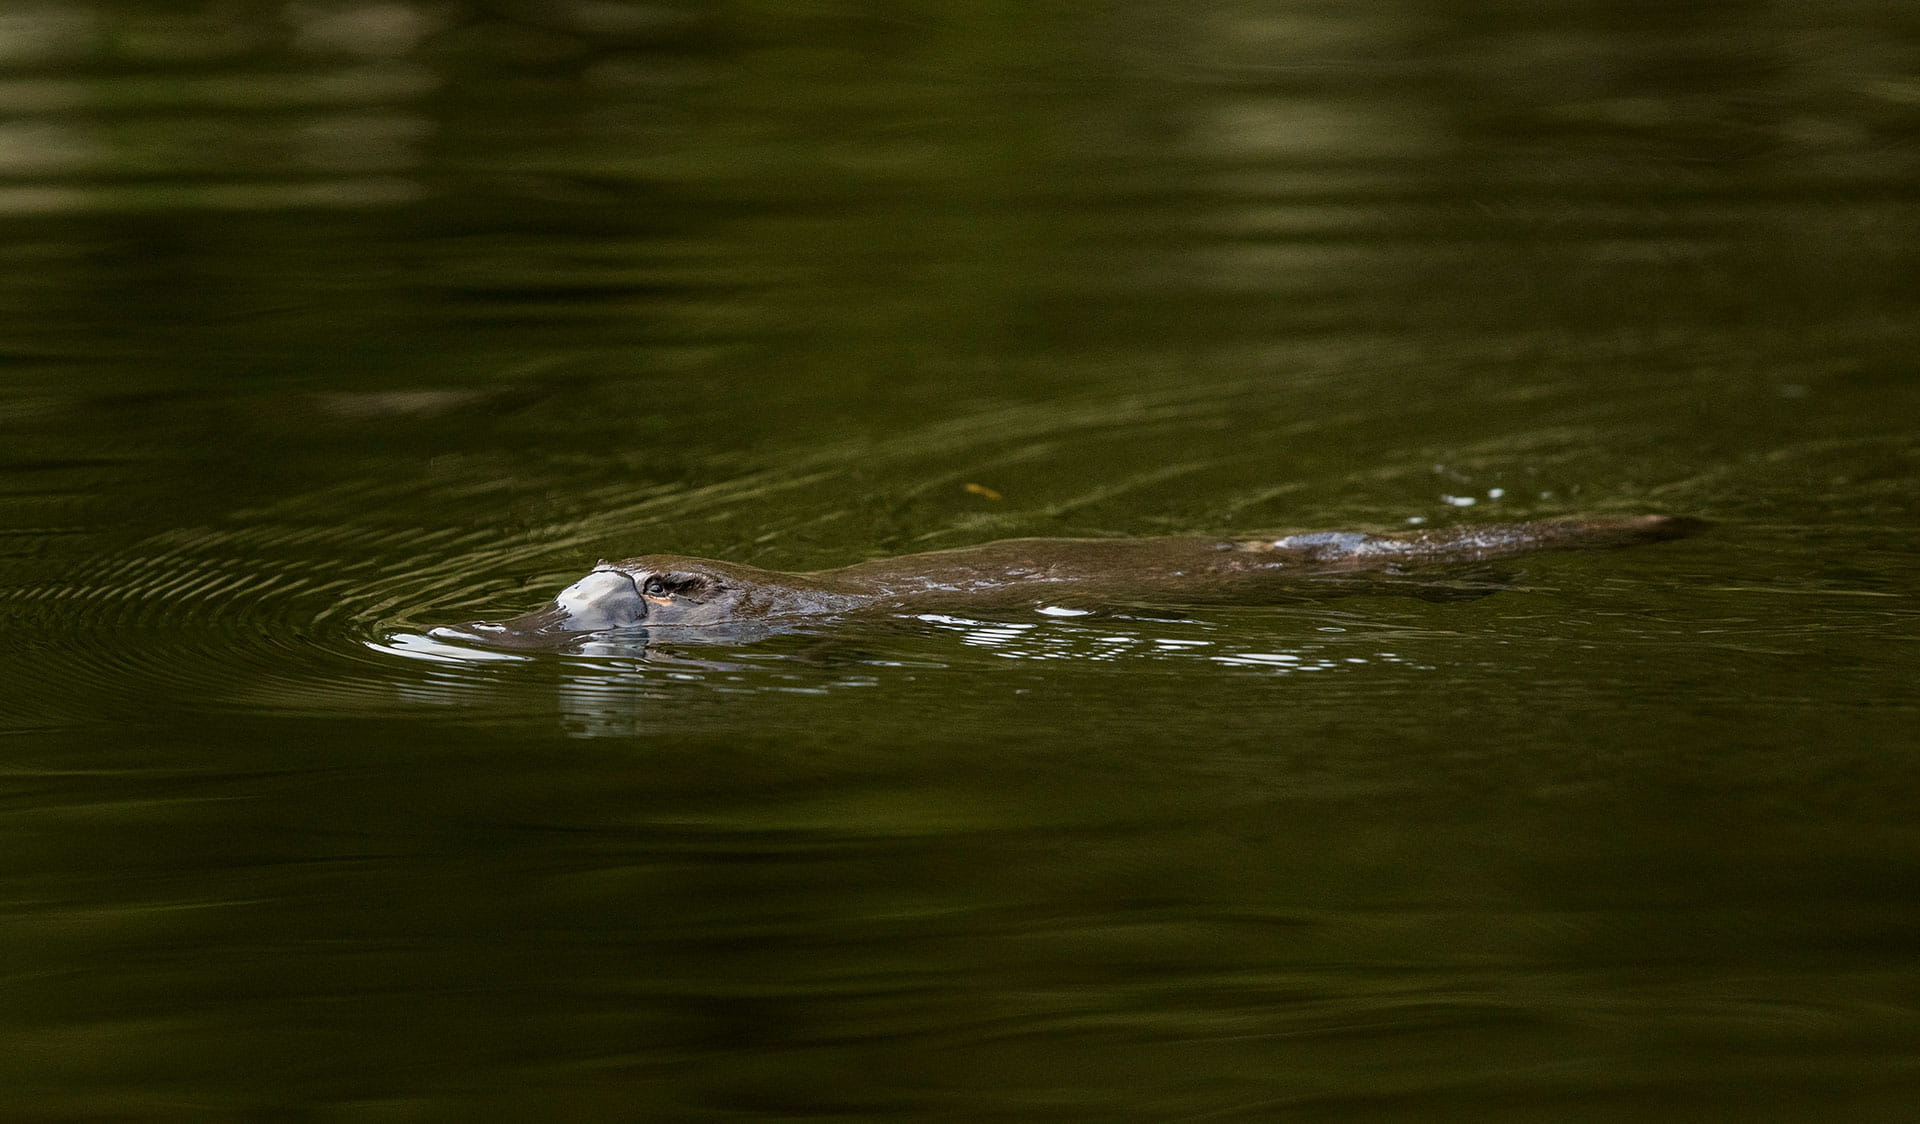 A platypus swims along the surface.